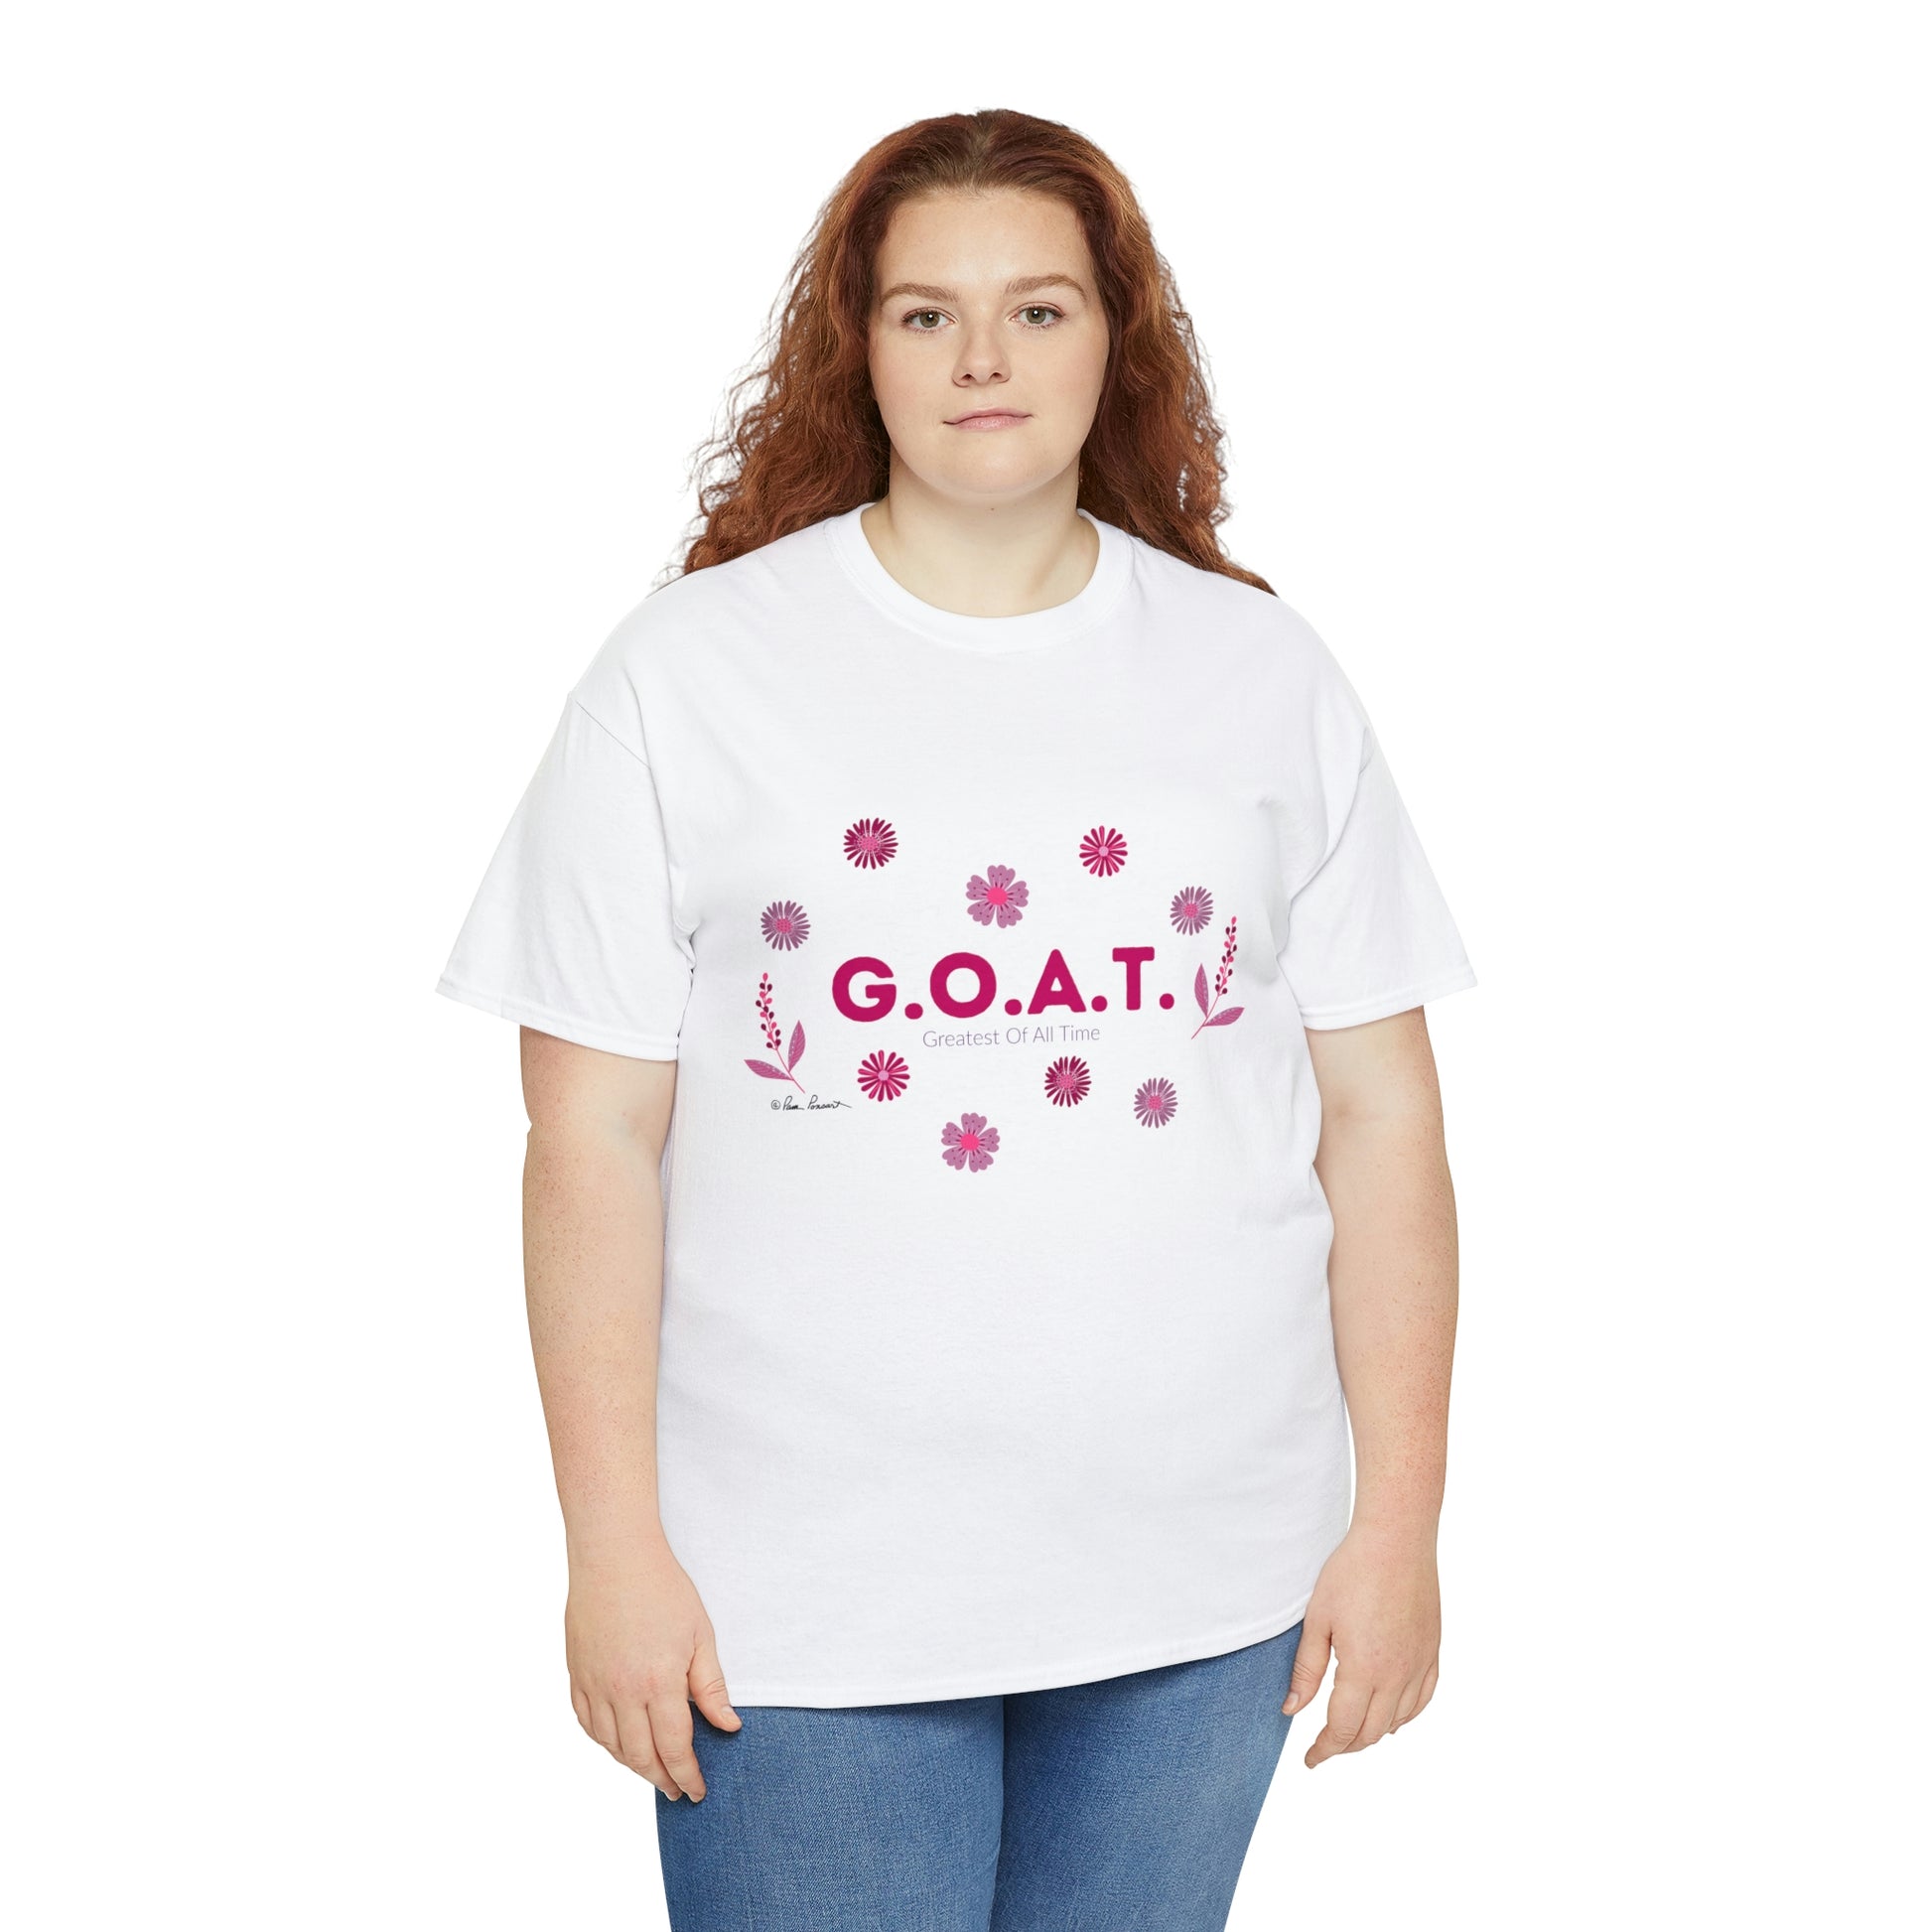 Mock up of a plus-size woman wearing the white t-shirt